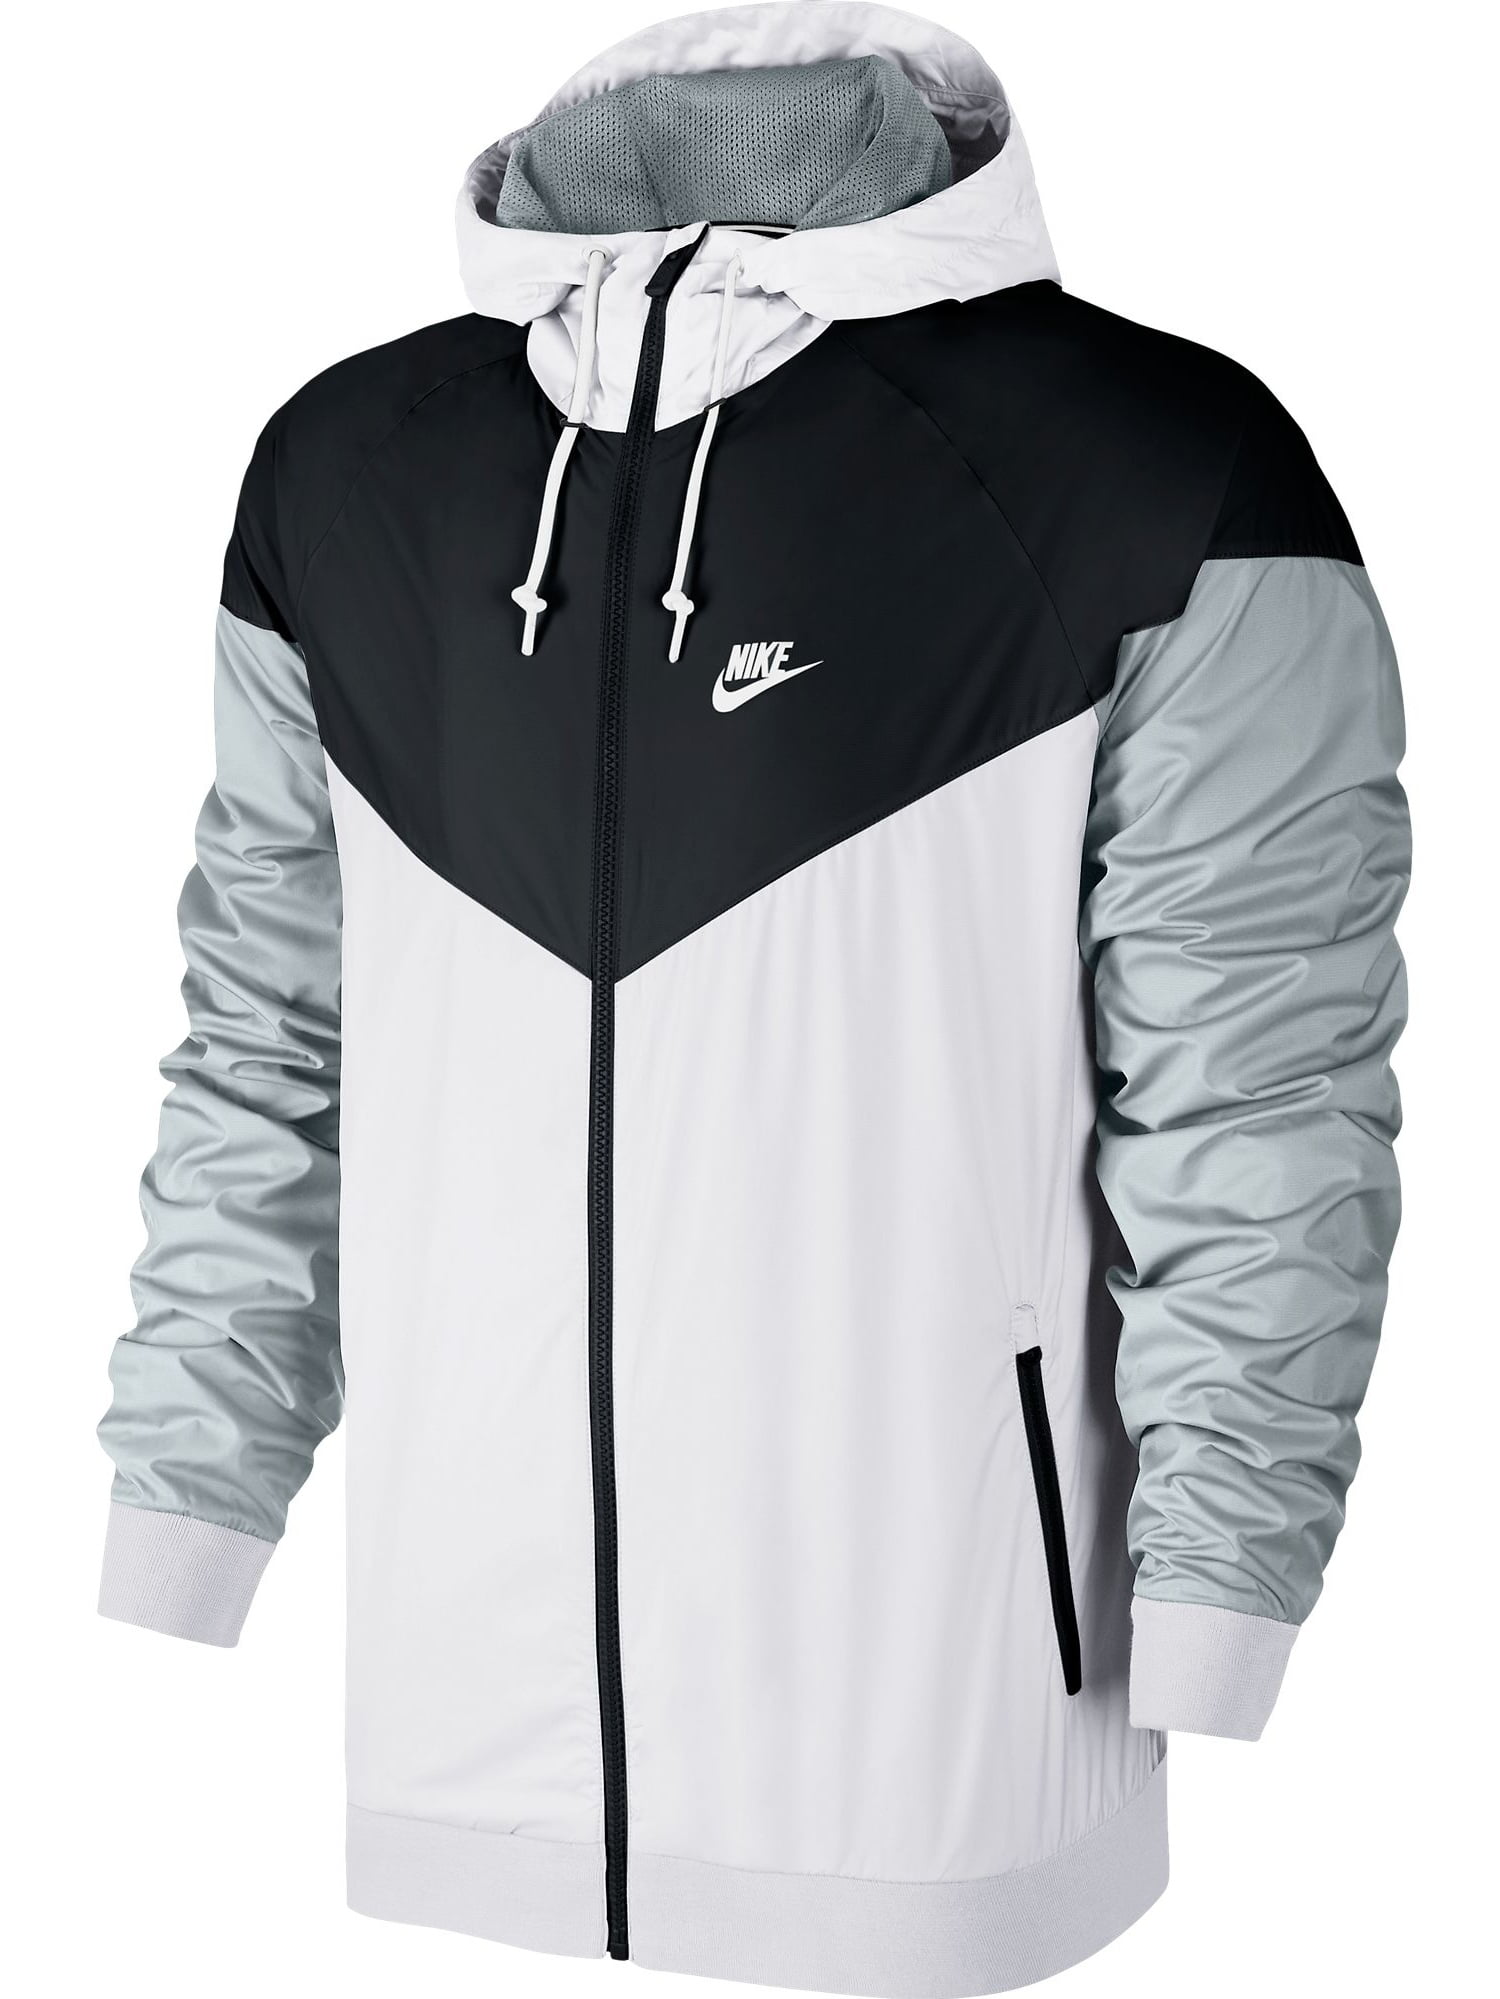 Aggregate 82+ grey nike jacket mens latest - in.thdonghoadian